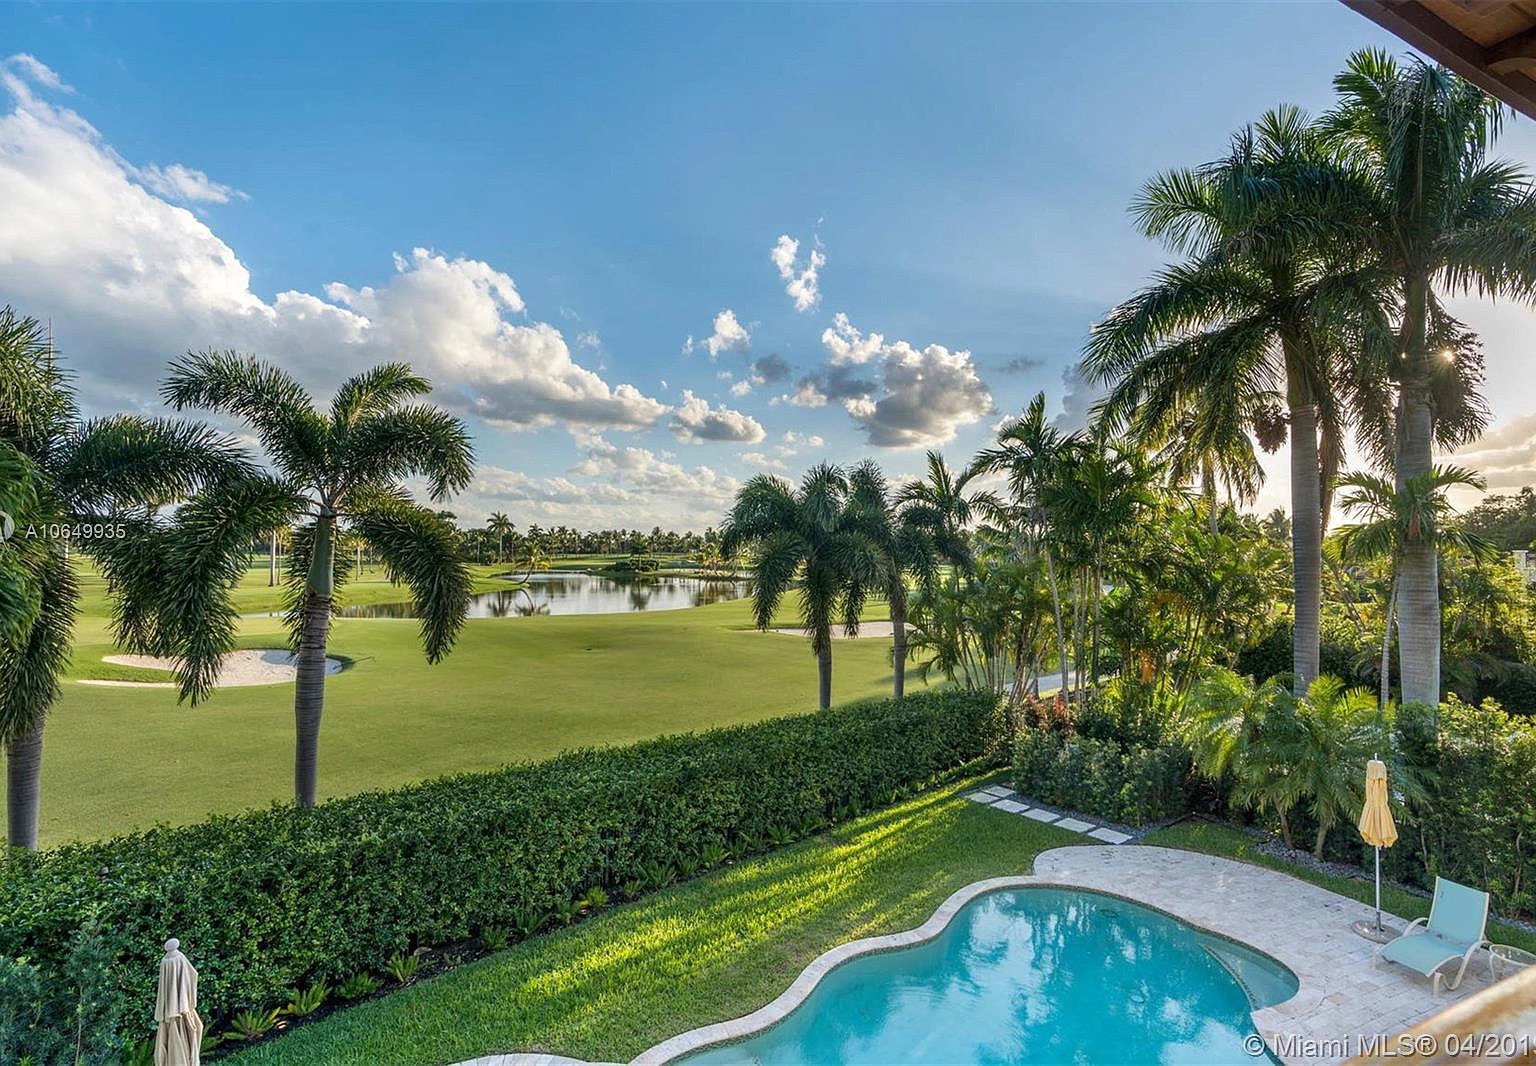 430 W 62nd St, Miami Beach, FL 33140 - $3,975,000 home for sale, house images, photos and pics gallery